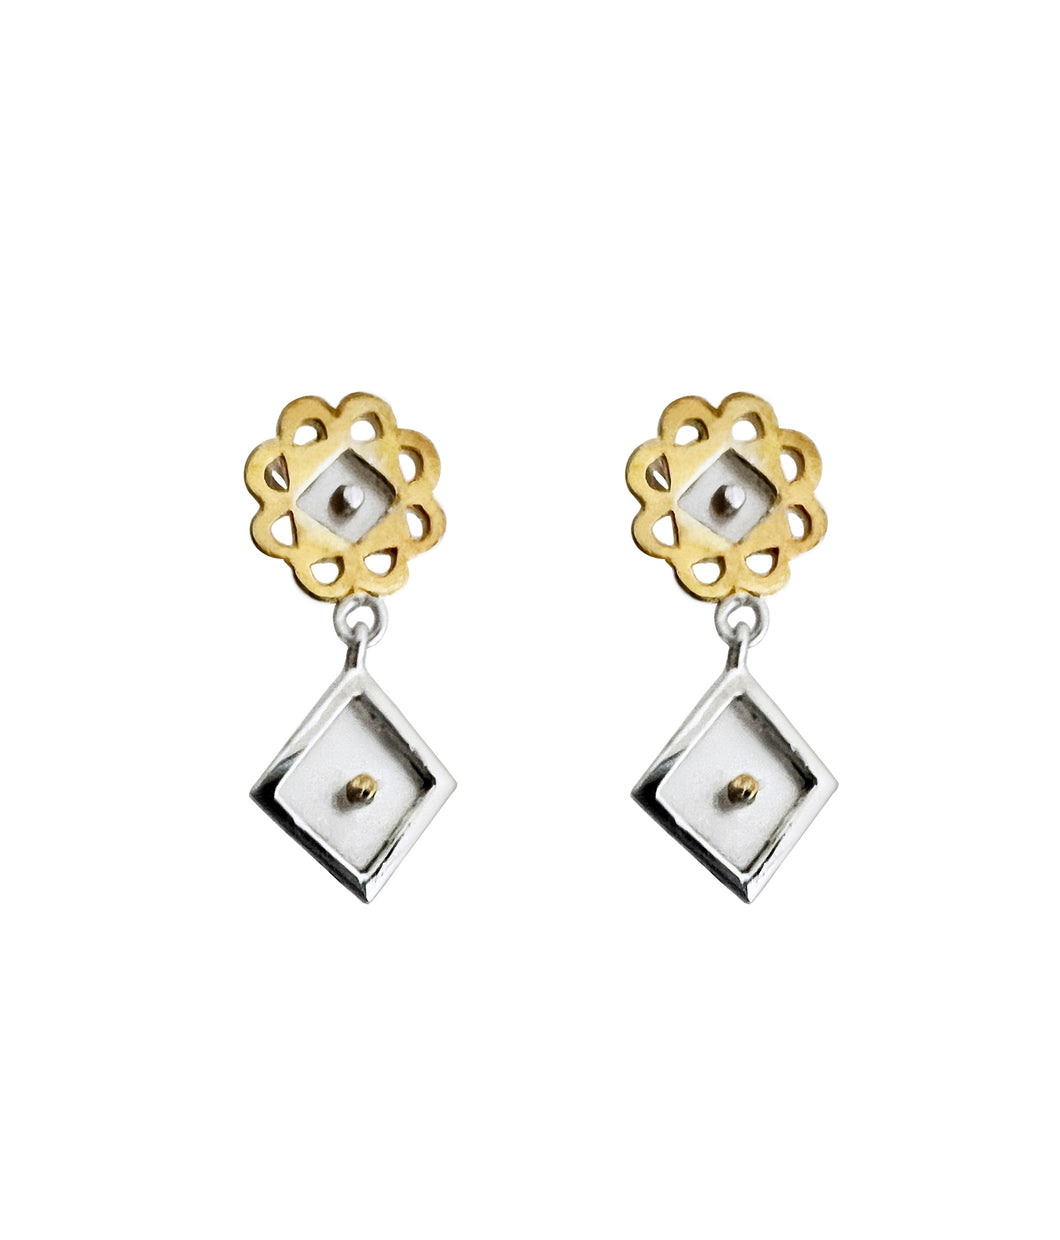 Yellow gold plated silver earrings embelished with mother-of-pearl